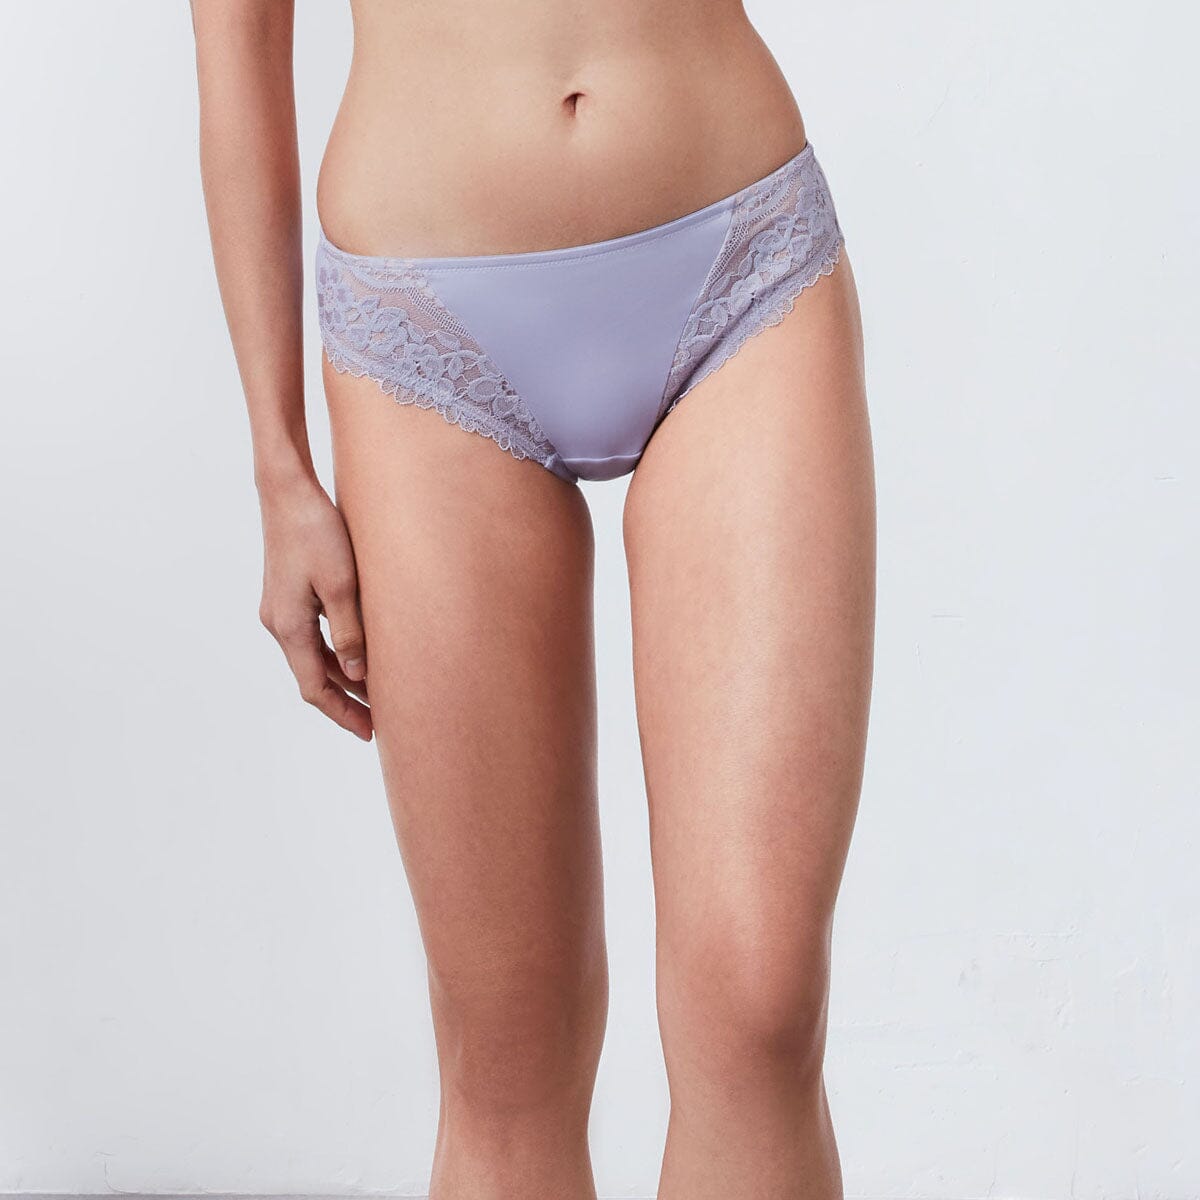 (FW23 No Photo) Match Back Lace Bikini Panty Panty Her Own Words Languid Lavender S 